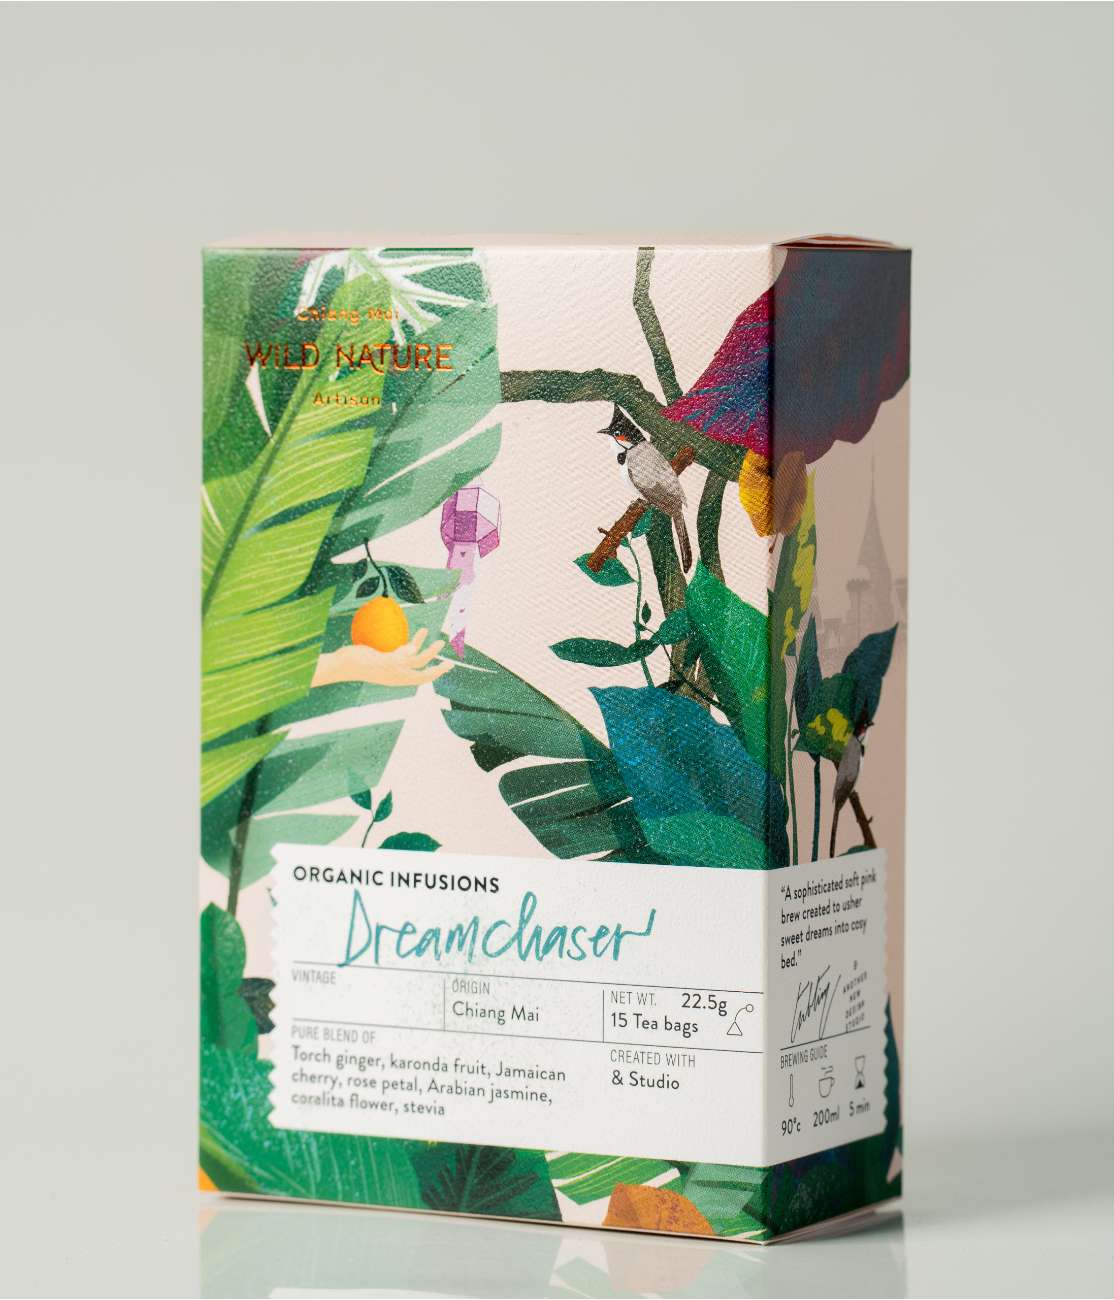 Wild Nature Organic Infusions Dreamchaser Tea